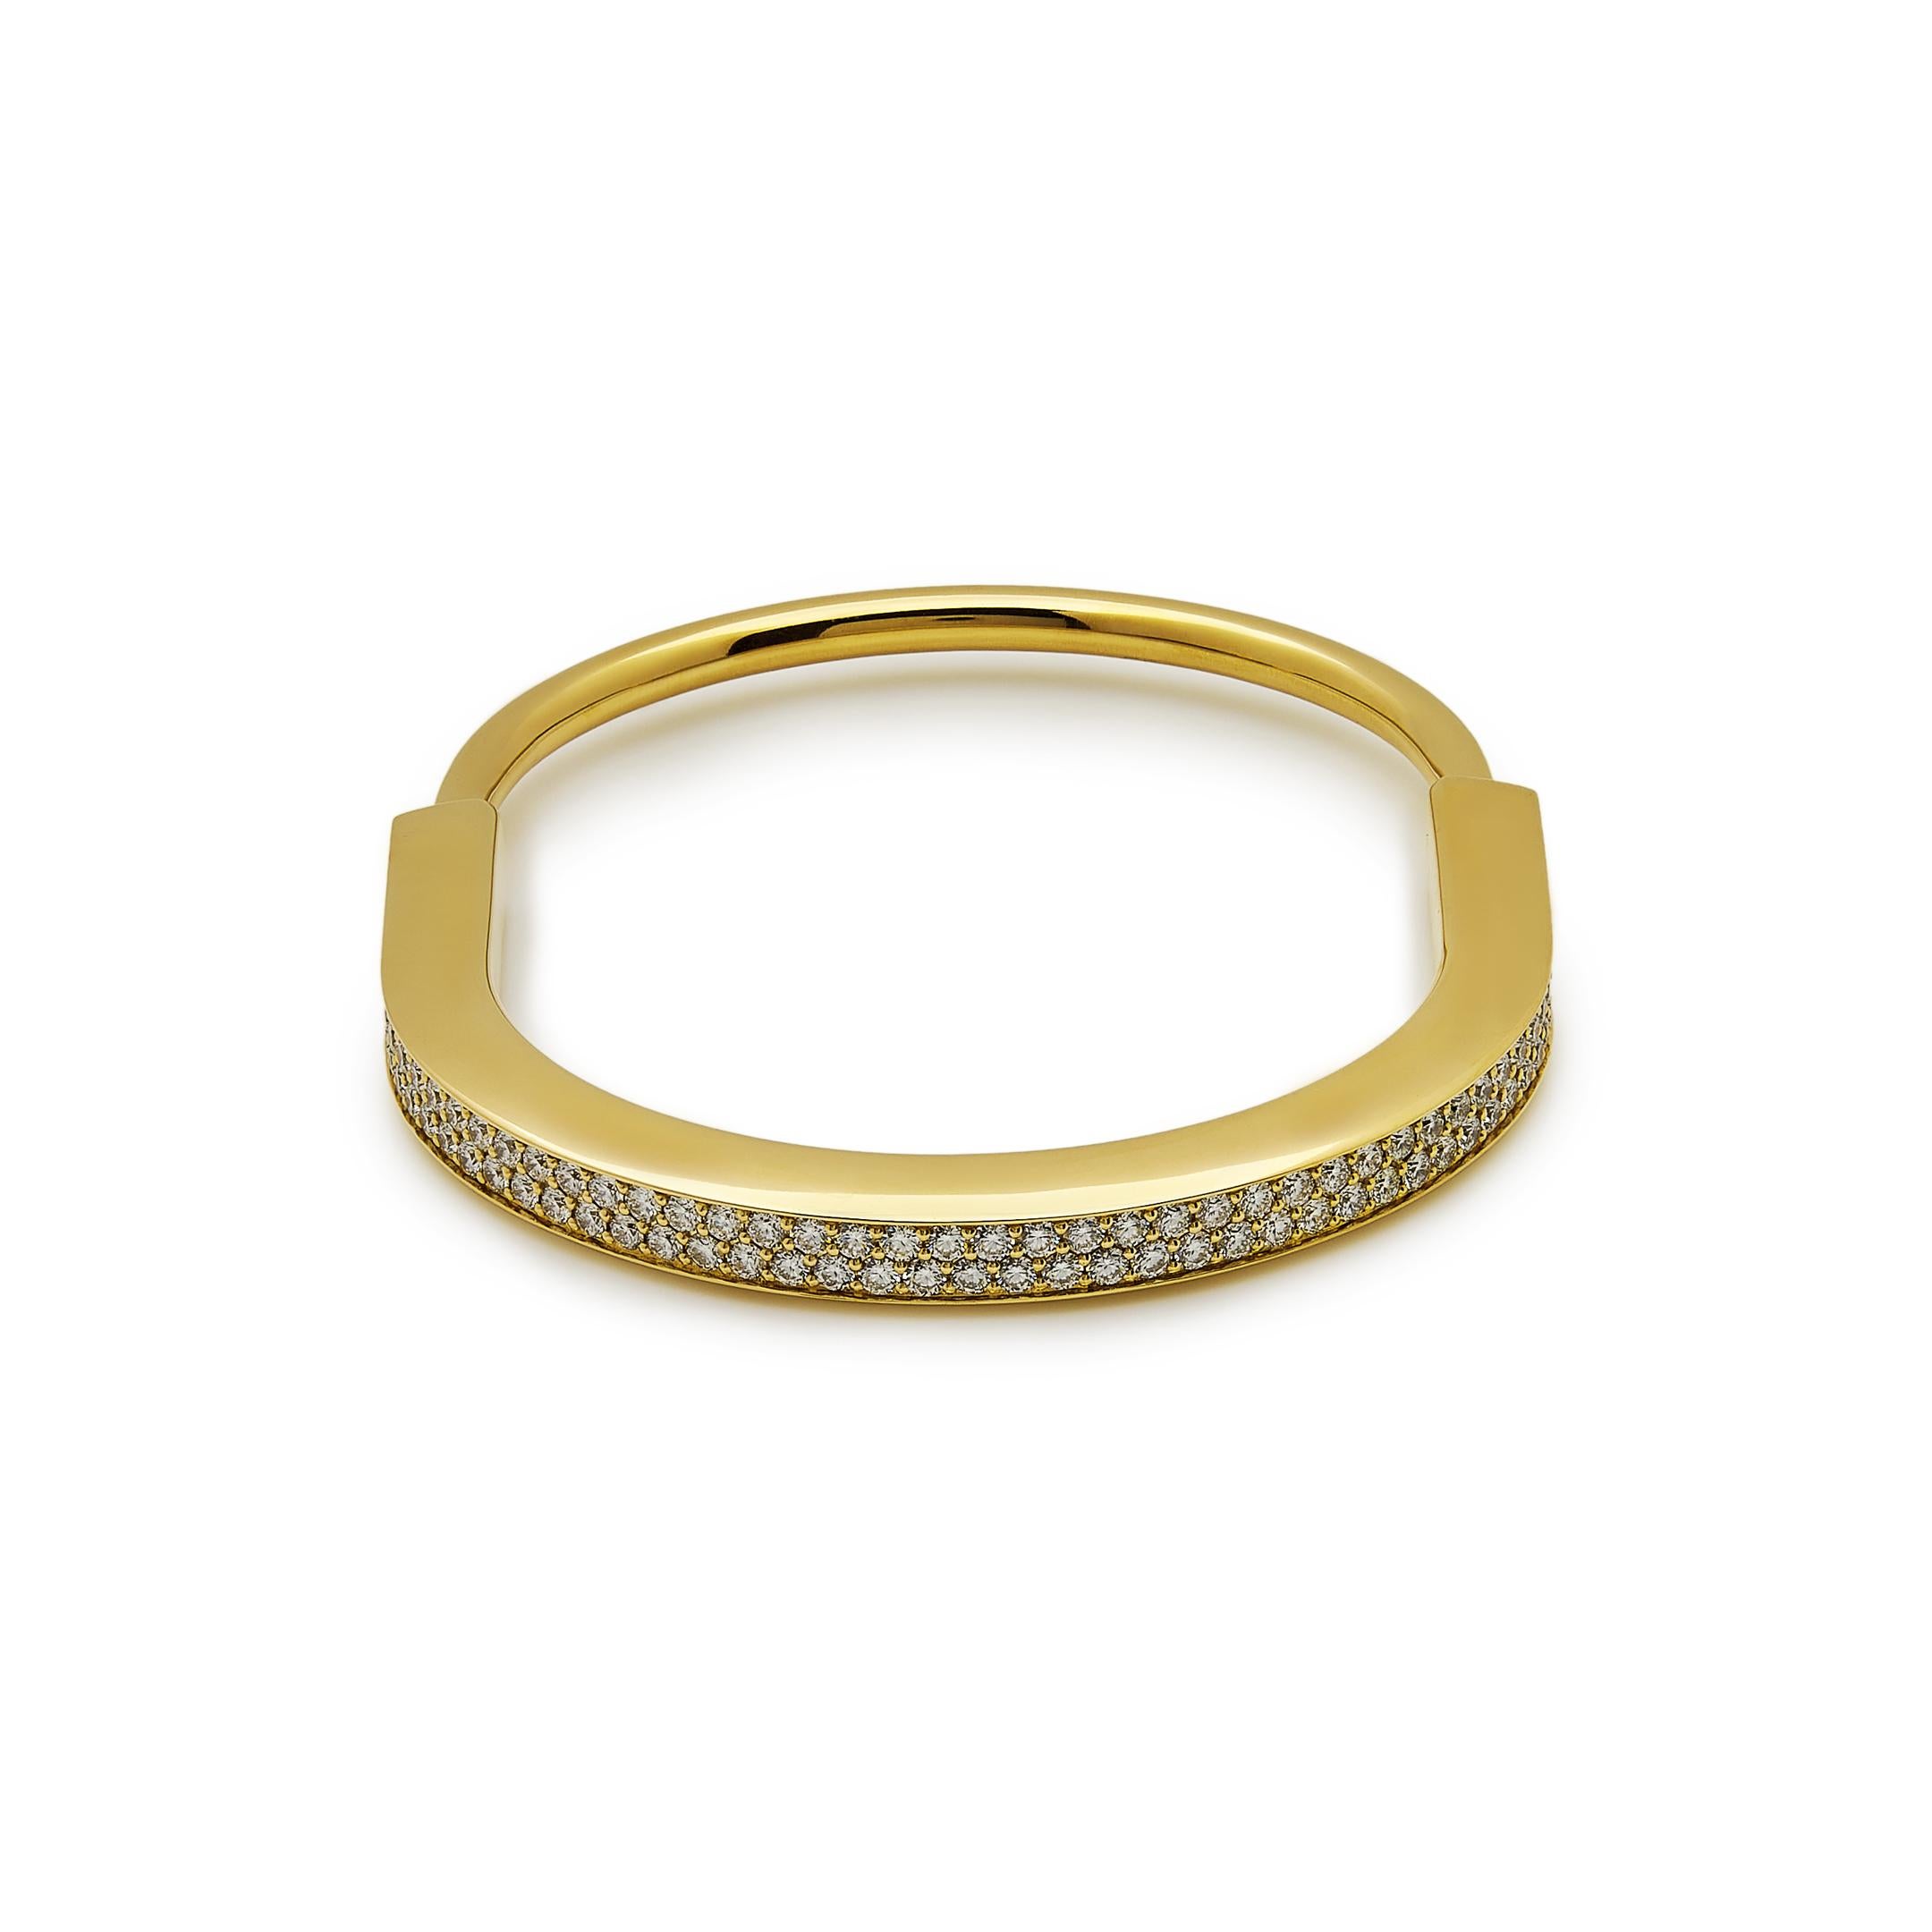 Tiffany & Co. Lock Bangle in Yellow Gold with Full Pavé Diamonds 70158264 In Excellent Condition For Sale In New York, NY